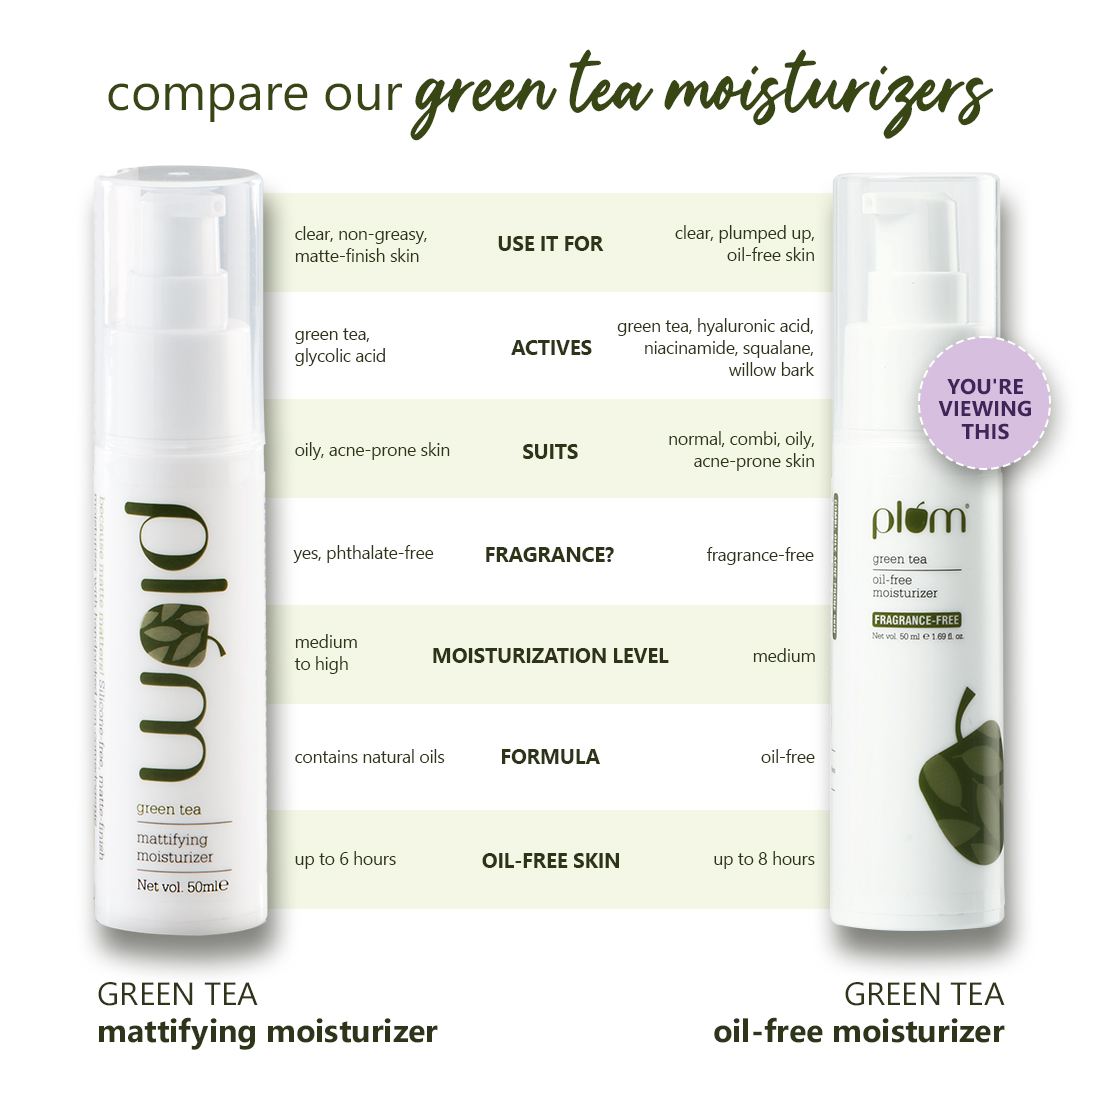 Shop Plum Green Tea Oil Free Moisturizer on Sublime Life. Fights Acne, Controls Hydration, Increases Collagen Production.